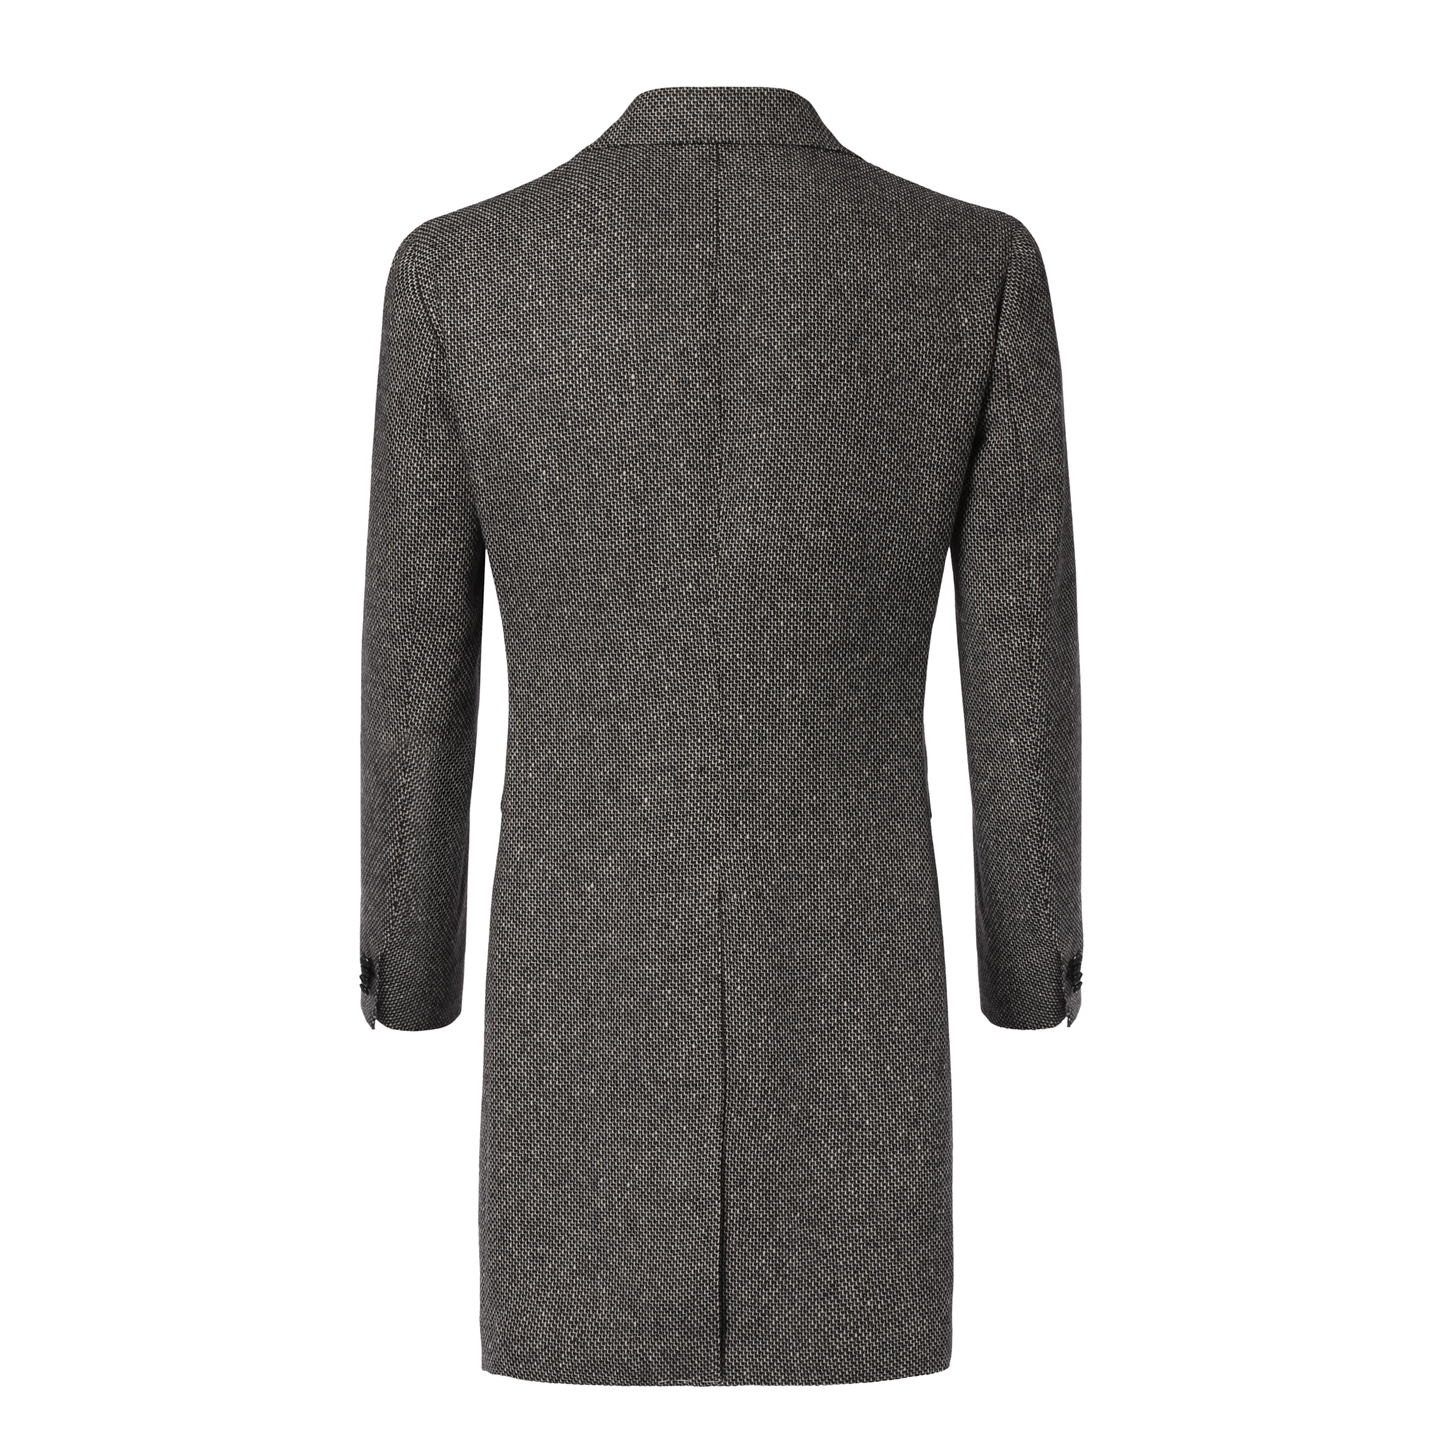 De Petrillo Single-Breasted Wool Coat. Exclusively Made for Sartale - SARTALE